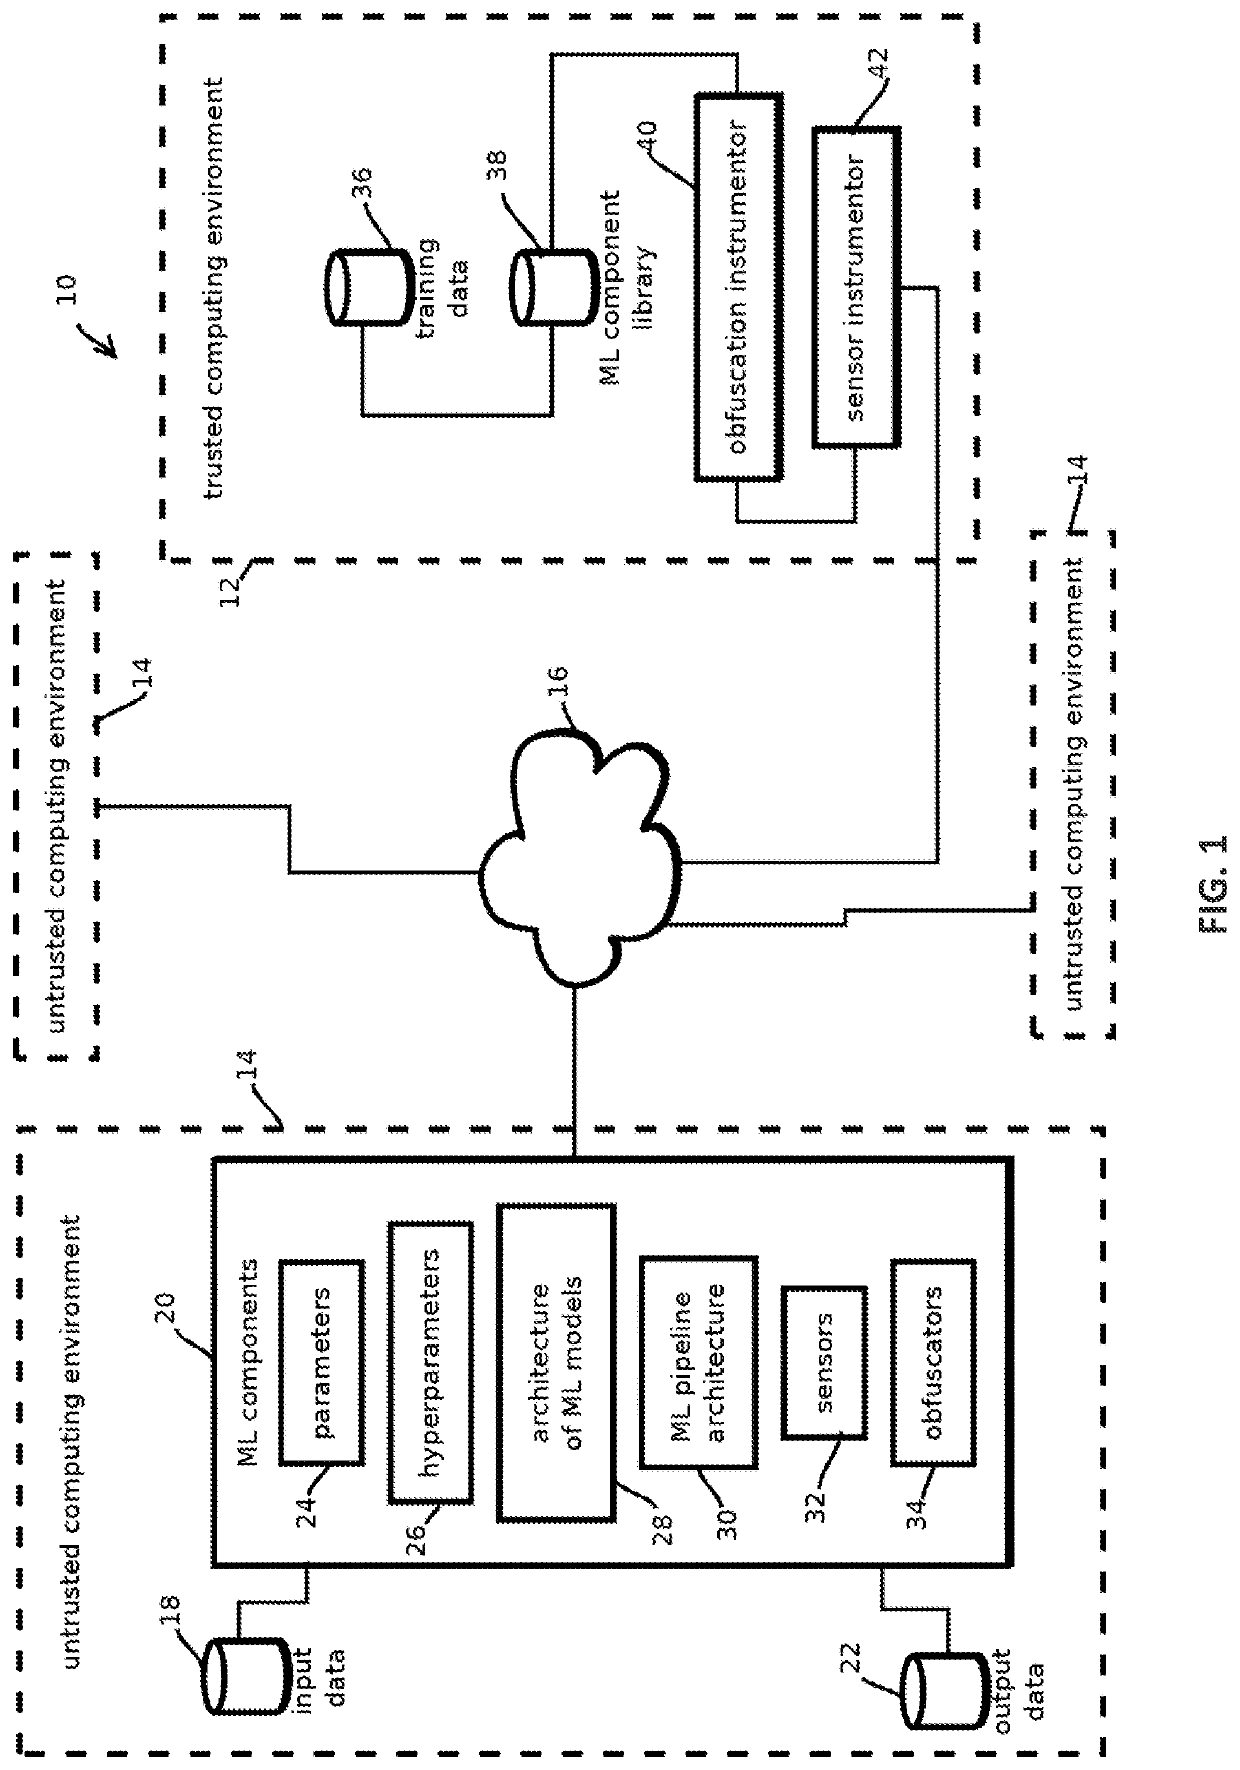 Auditable secure reverse engineering proof machine learning pipeline and methods